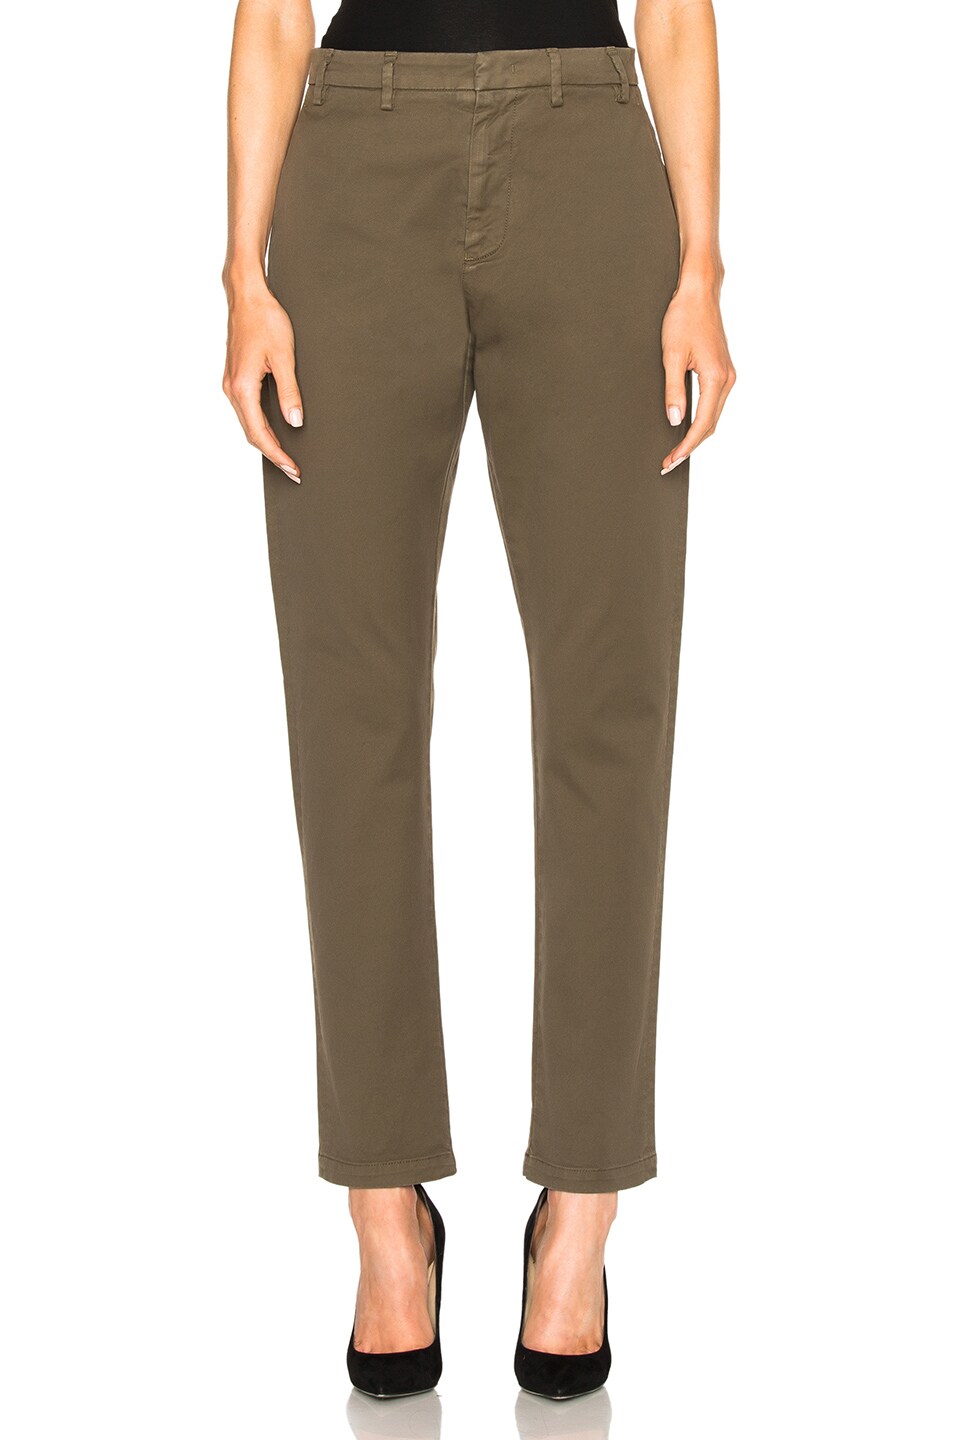 Image 1 of No. 21 Paul Pants in Army Green